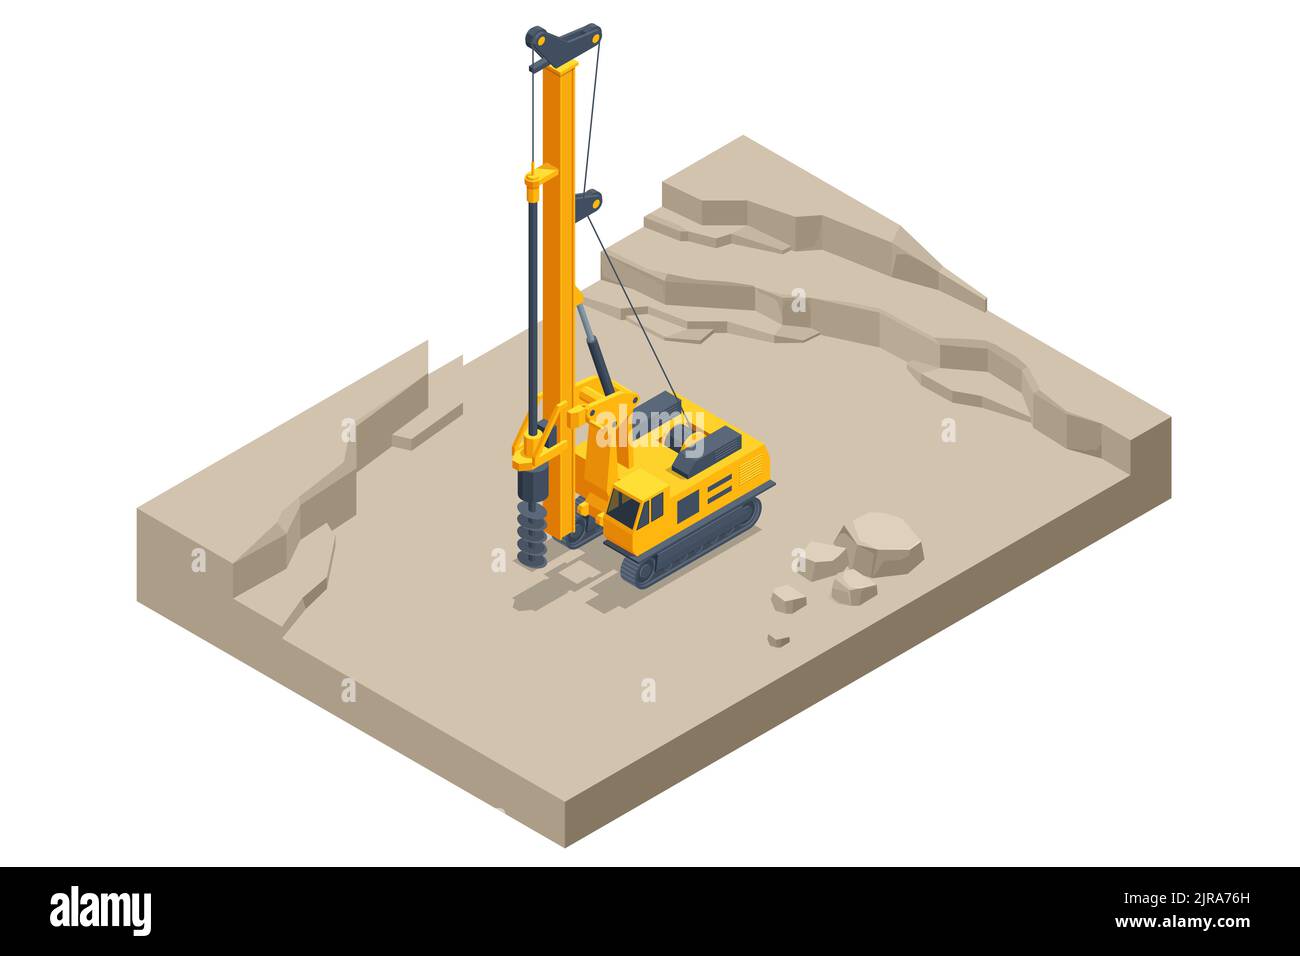 Isometric Track Drilling Machine. Drilling Tractor Working in the Mine. Mining Quarry, Mine. Equipment for high-mining industry. Stock Vector